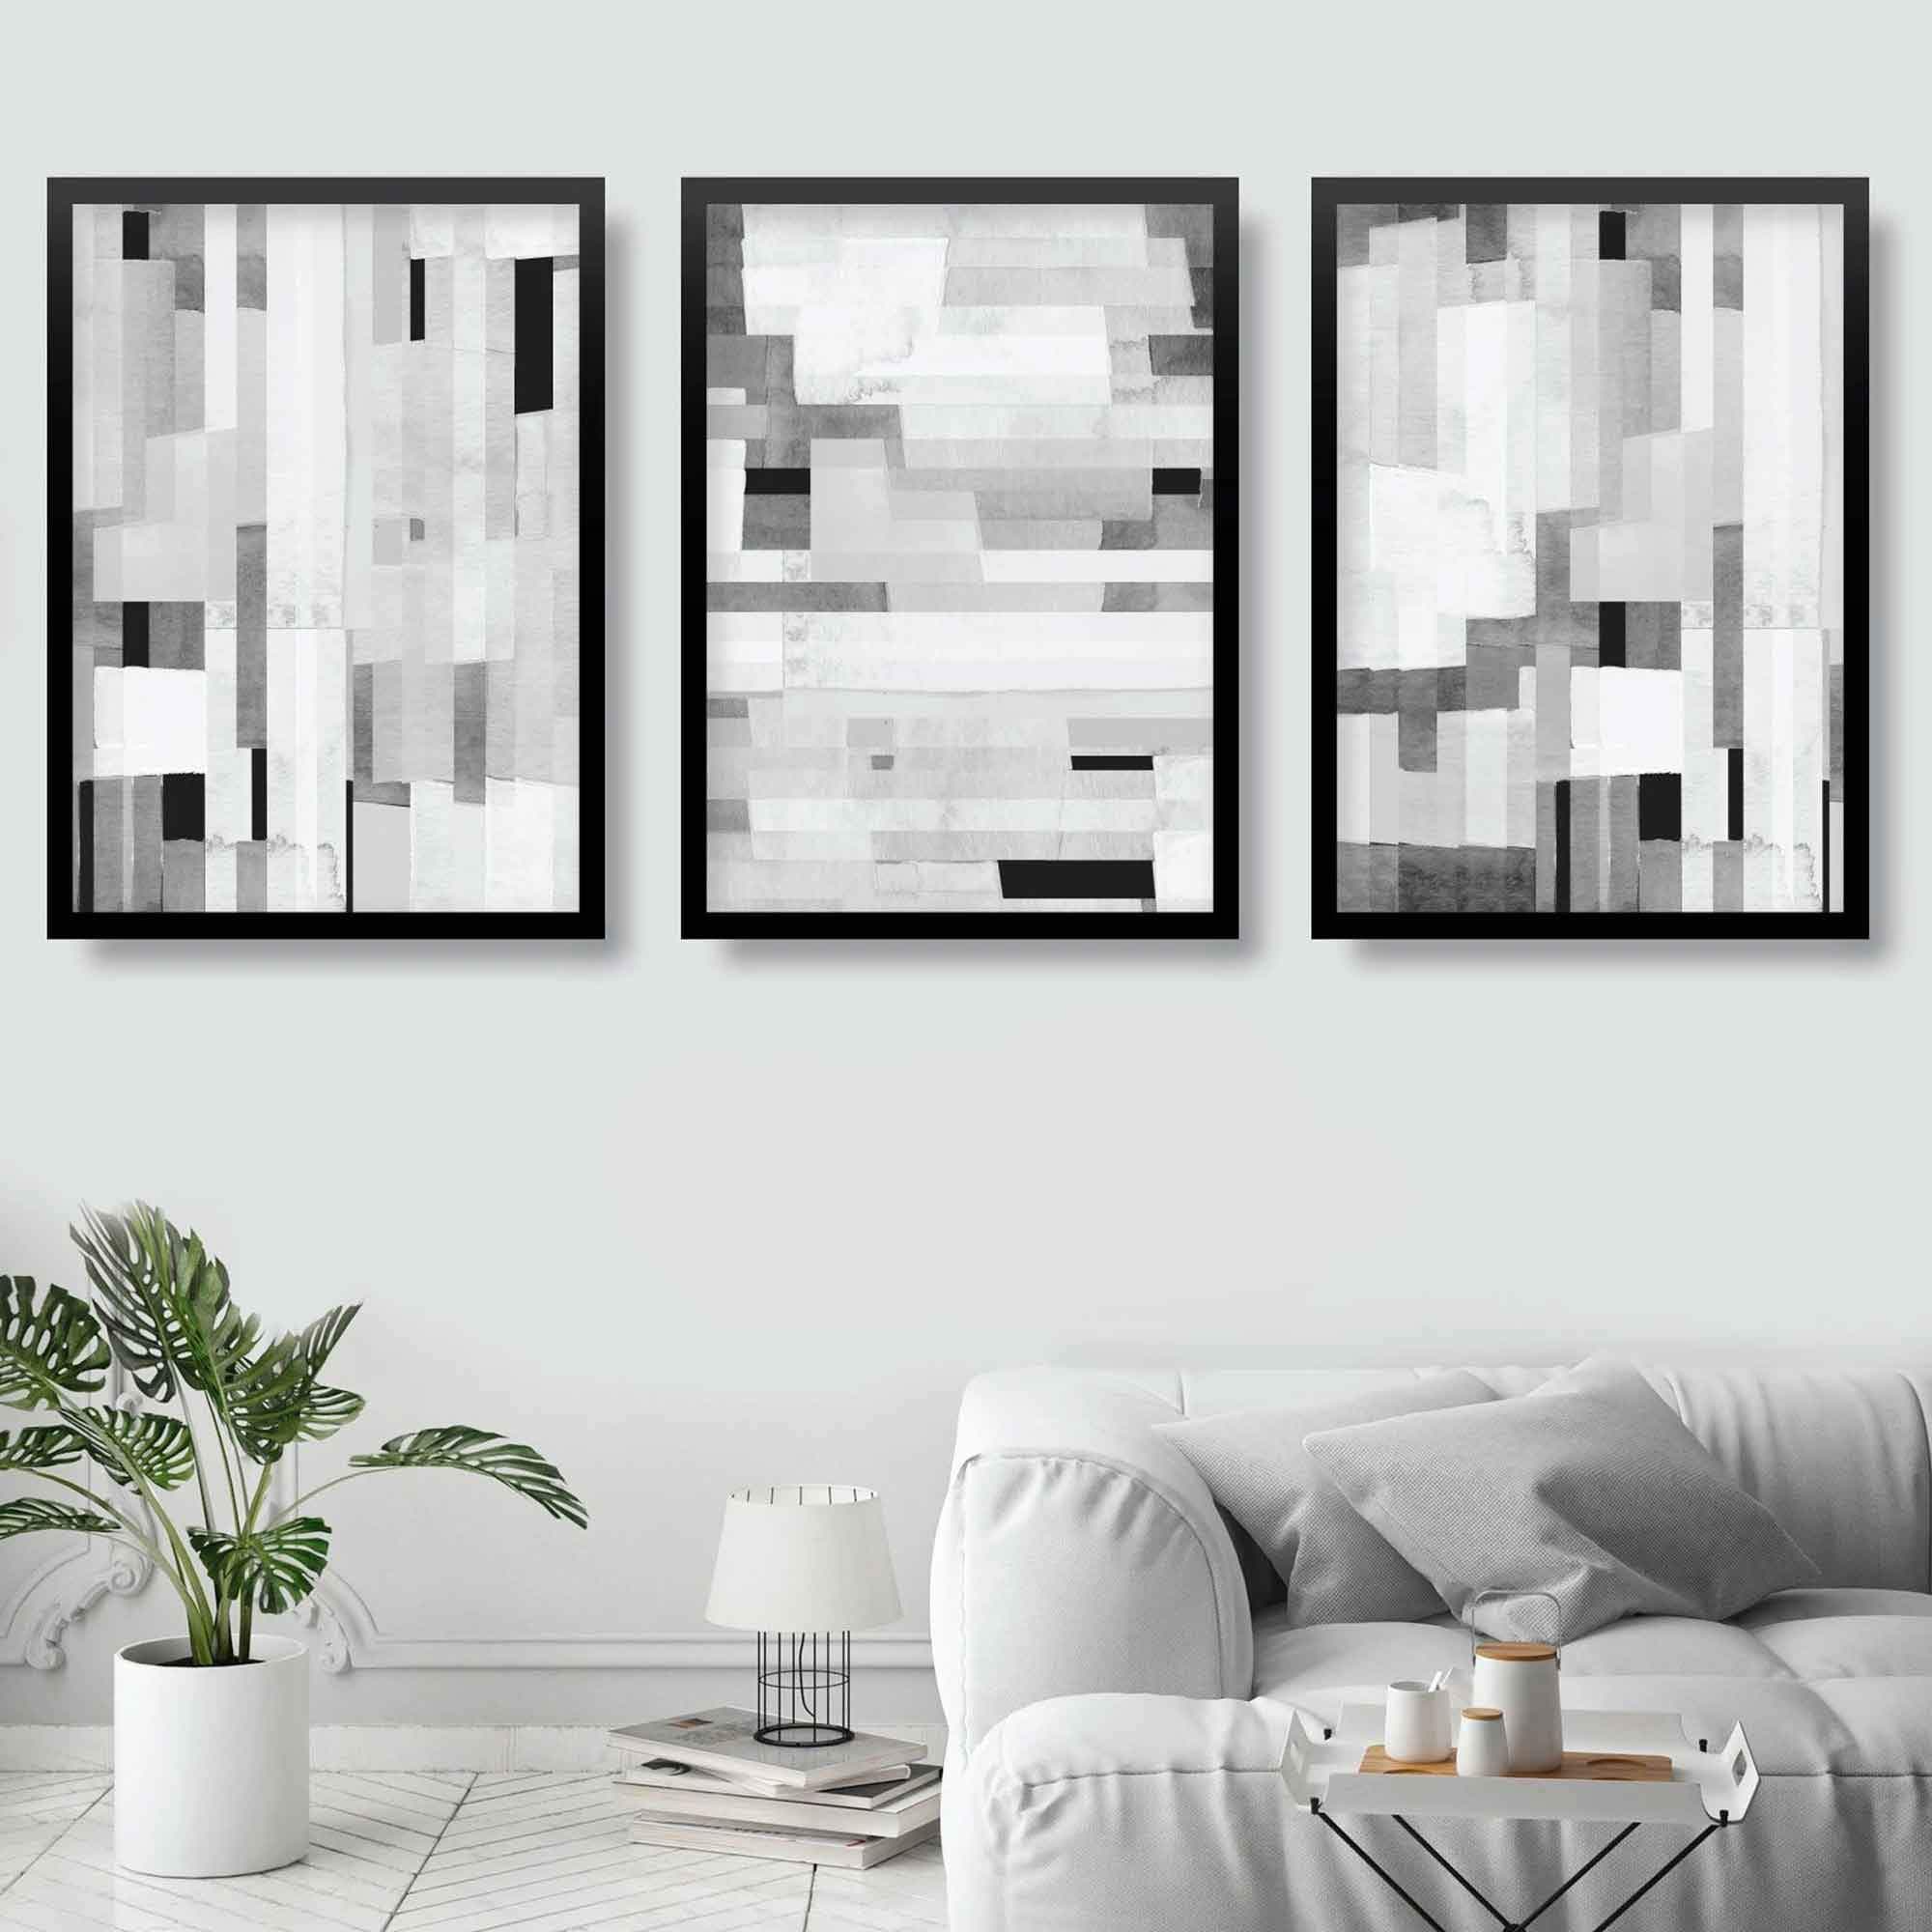 Set of 3 Abstract Black and White Blocks Art Prints